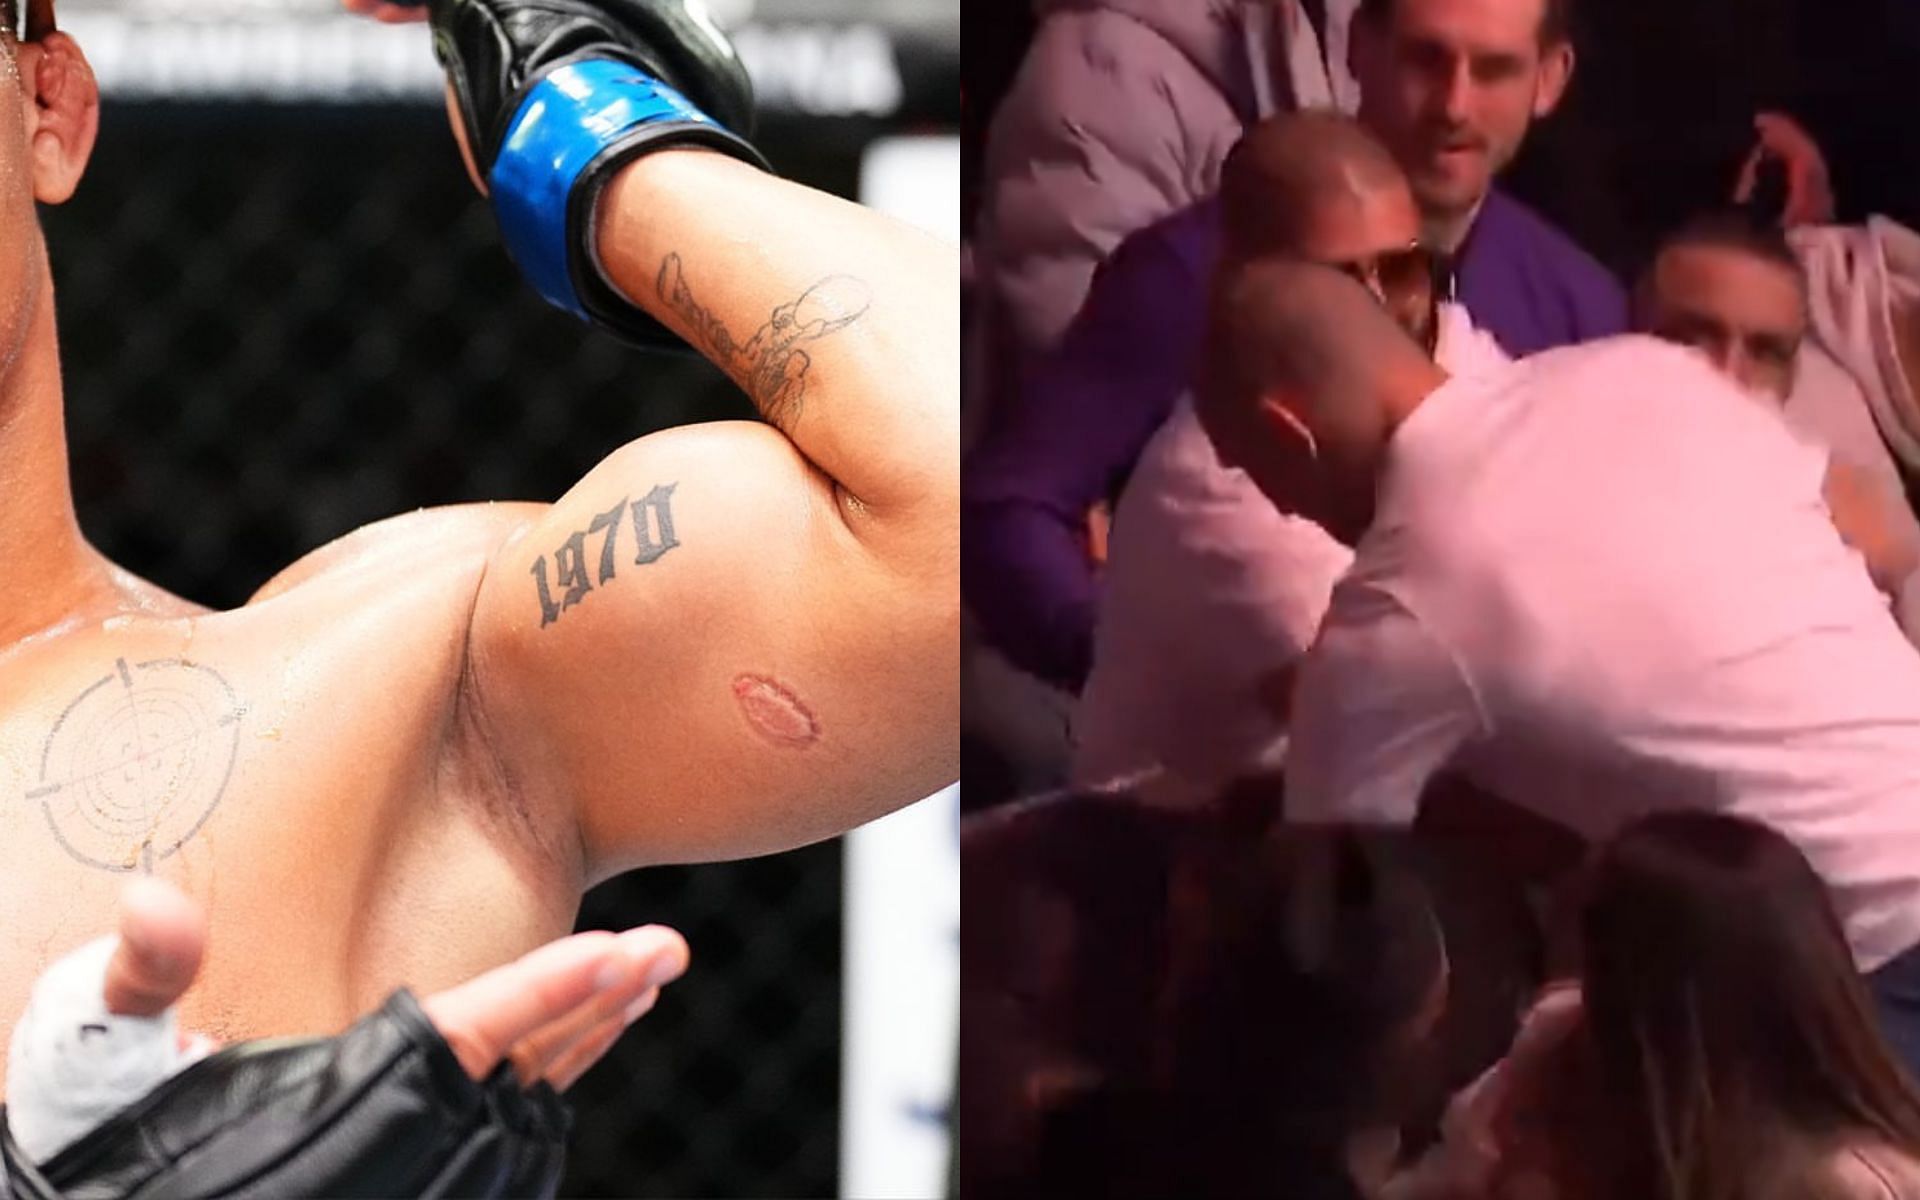 Andre Lima (left) was bitten by Igor Severino at UFC Vegas 89; Sean Strickland bit Dricus du Plessis during their brawl (right) at UFC 296 [Images courtesy: @tntsportsufc on Instagram; @ufc on X]